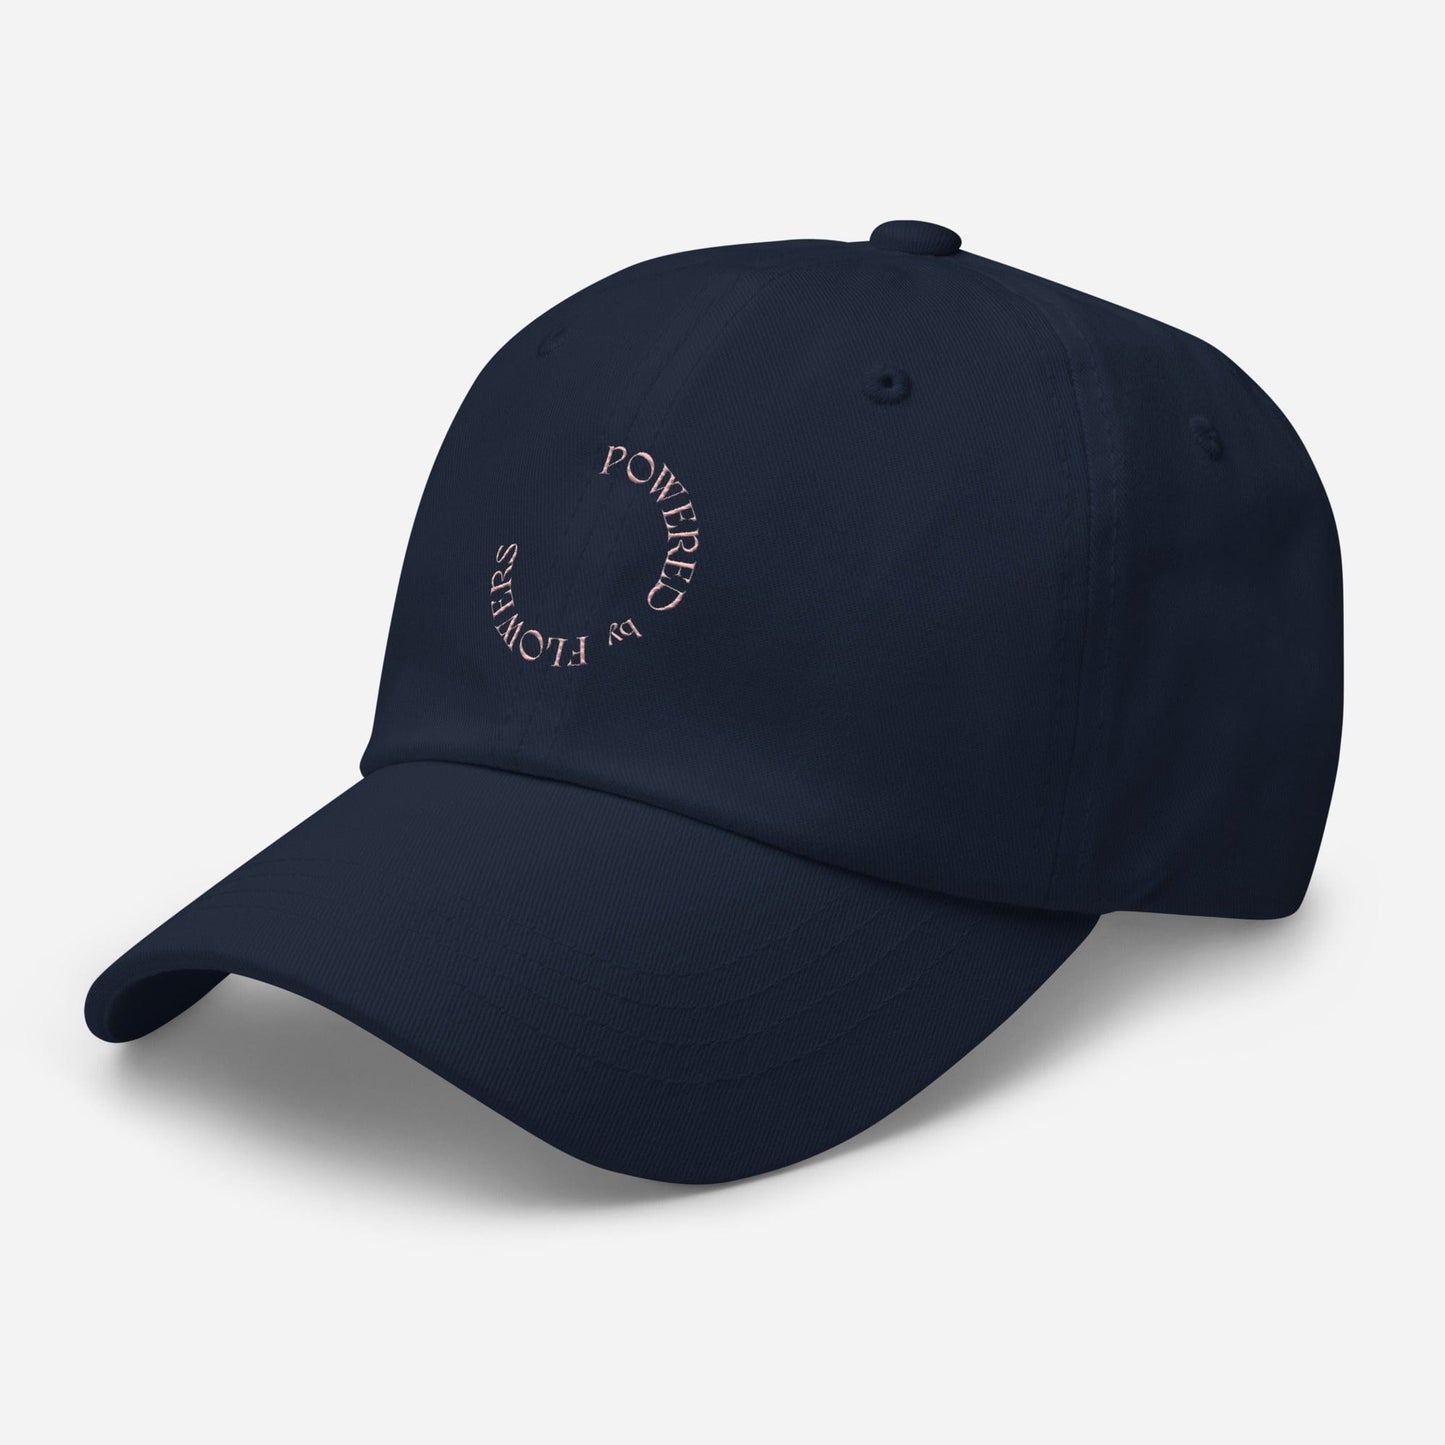 Powered by Flowers Hat - Pink Lettering